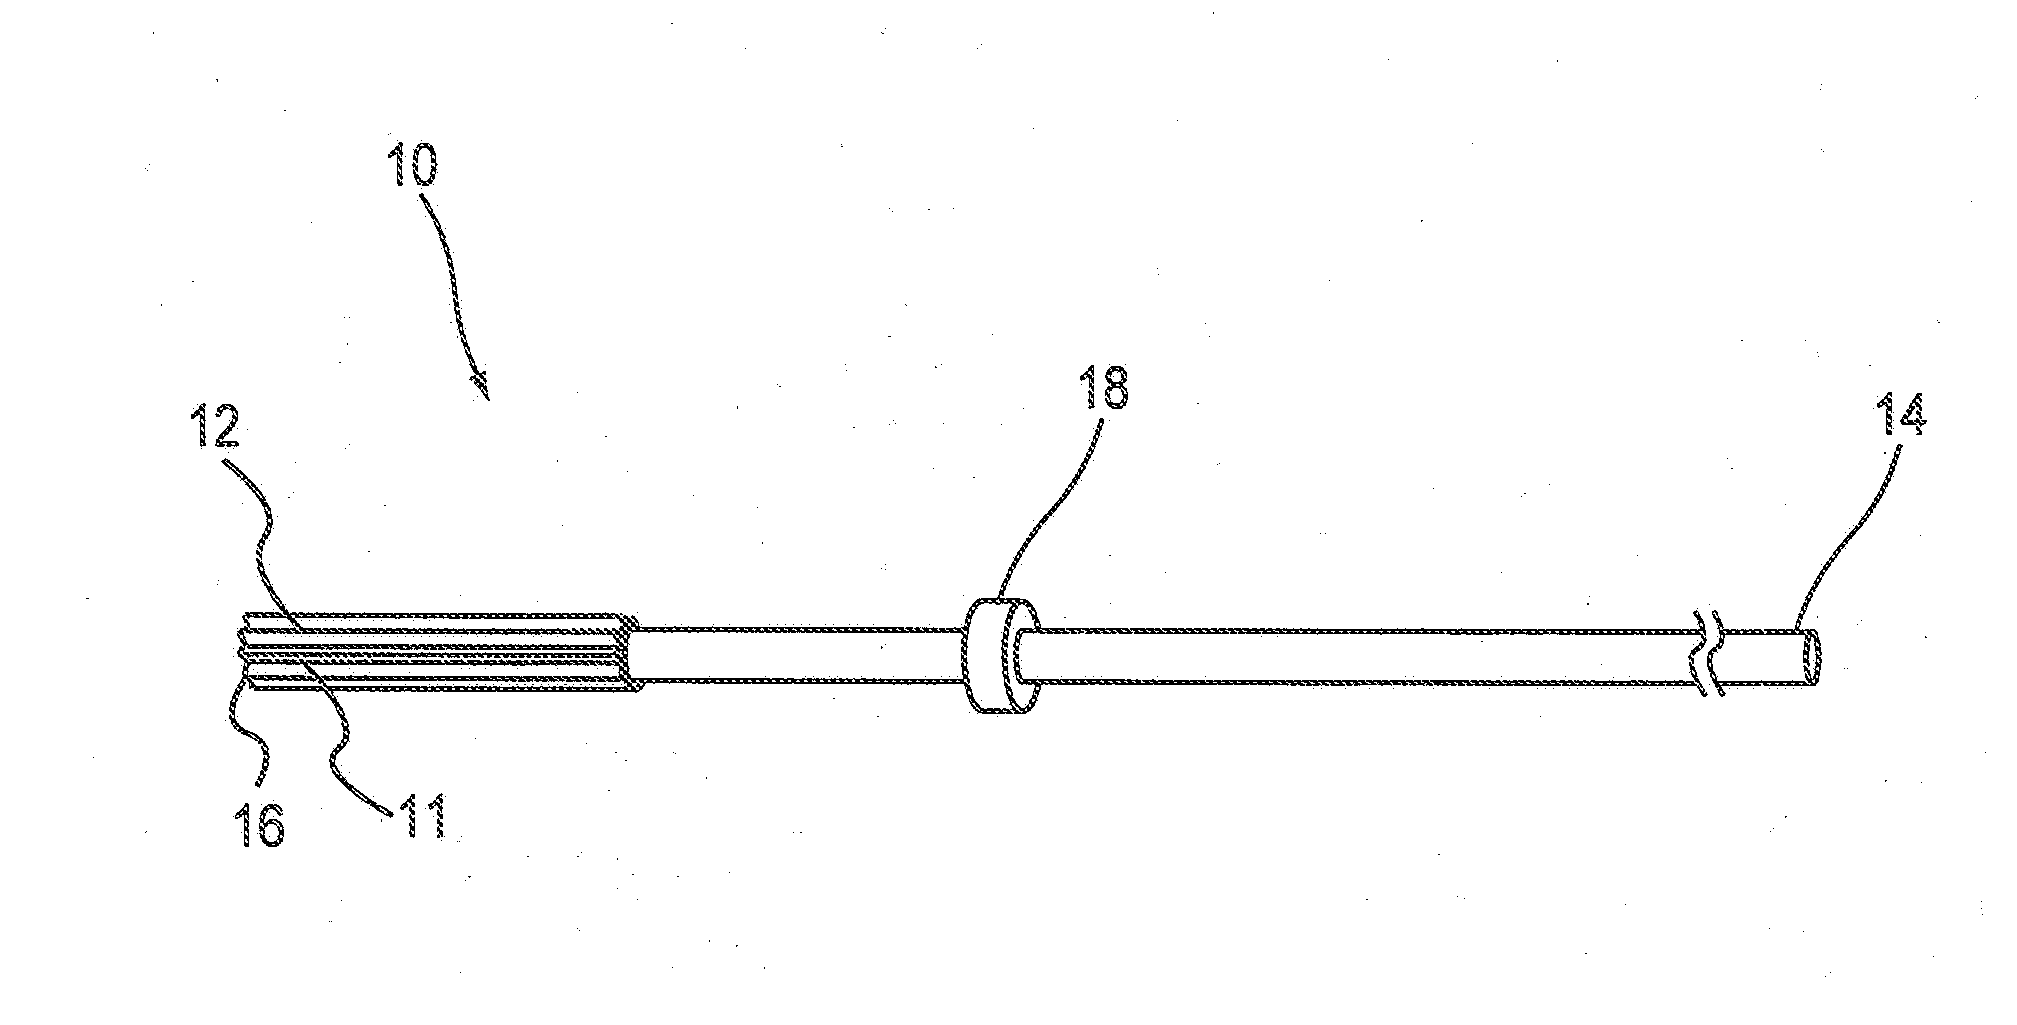 Catheter design for use in treating pleural diseases